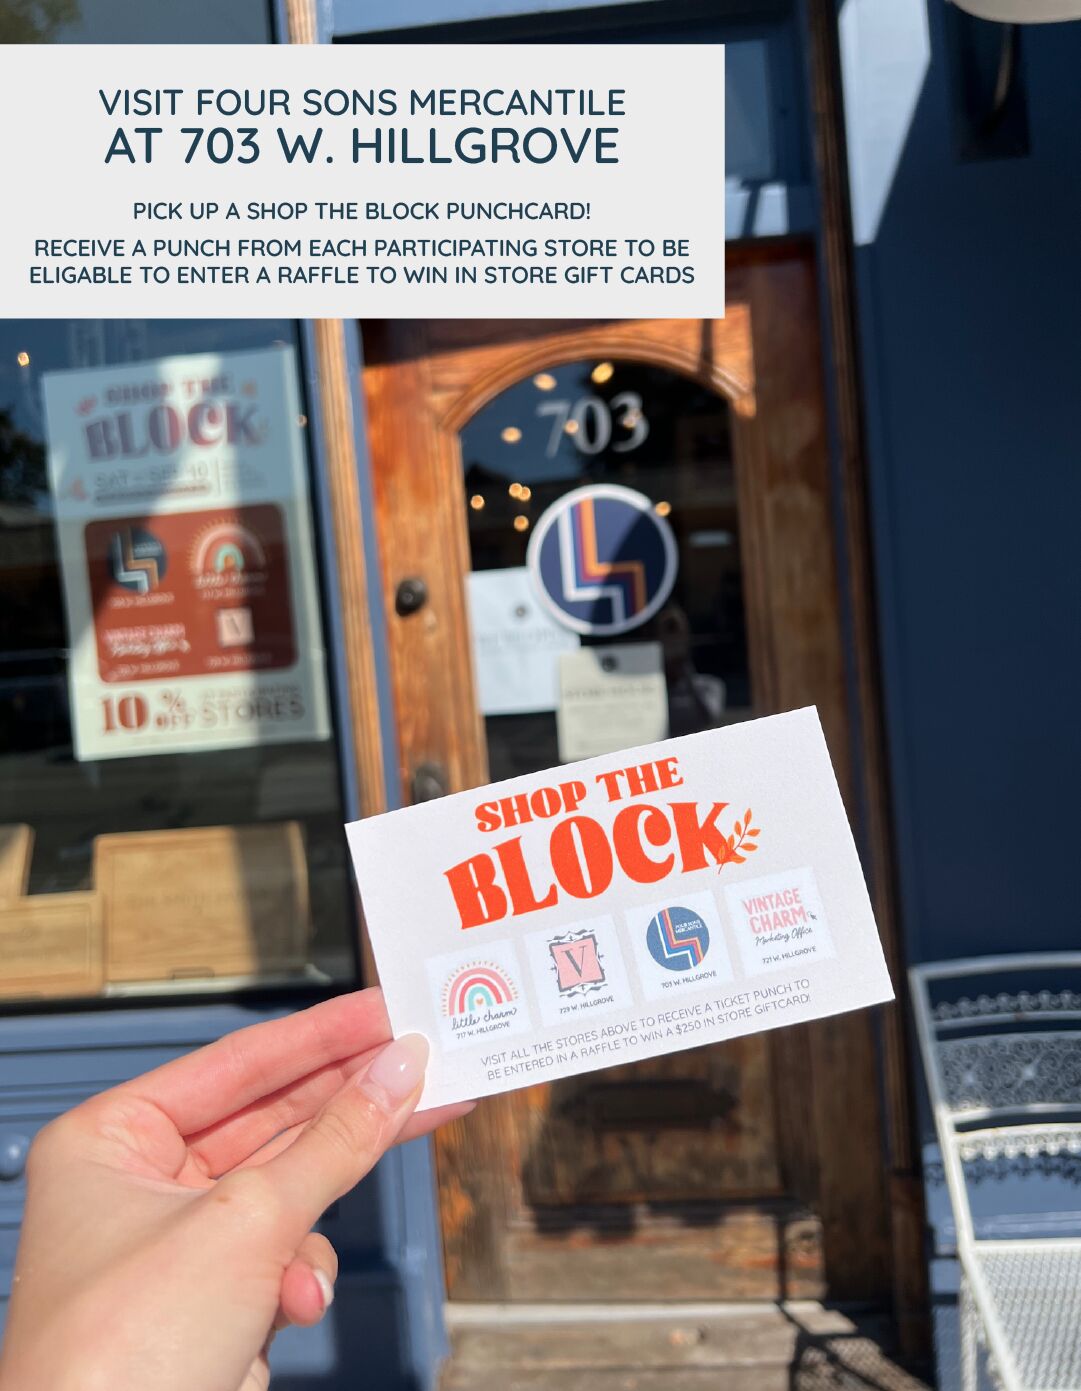 VISIT FOUR SONS MERCANTILE AT 703 W. HILLGROVE PICK UP A SHOP THE BLOCK PUNCHCARD! RECEIVE A PUNCH FROM EACH PARTICIPATING STORE TO BE ELIGABLE TO ENTER A RAFFLE TO WIN IN STORE GIFT CARDS 